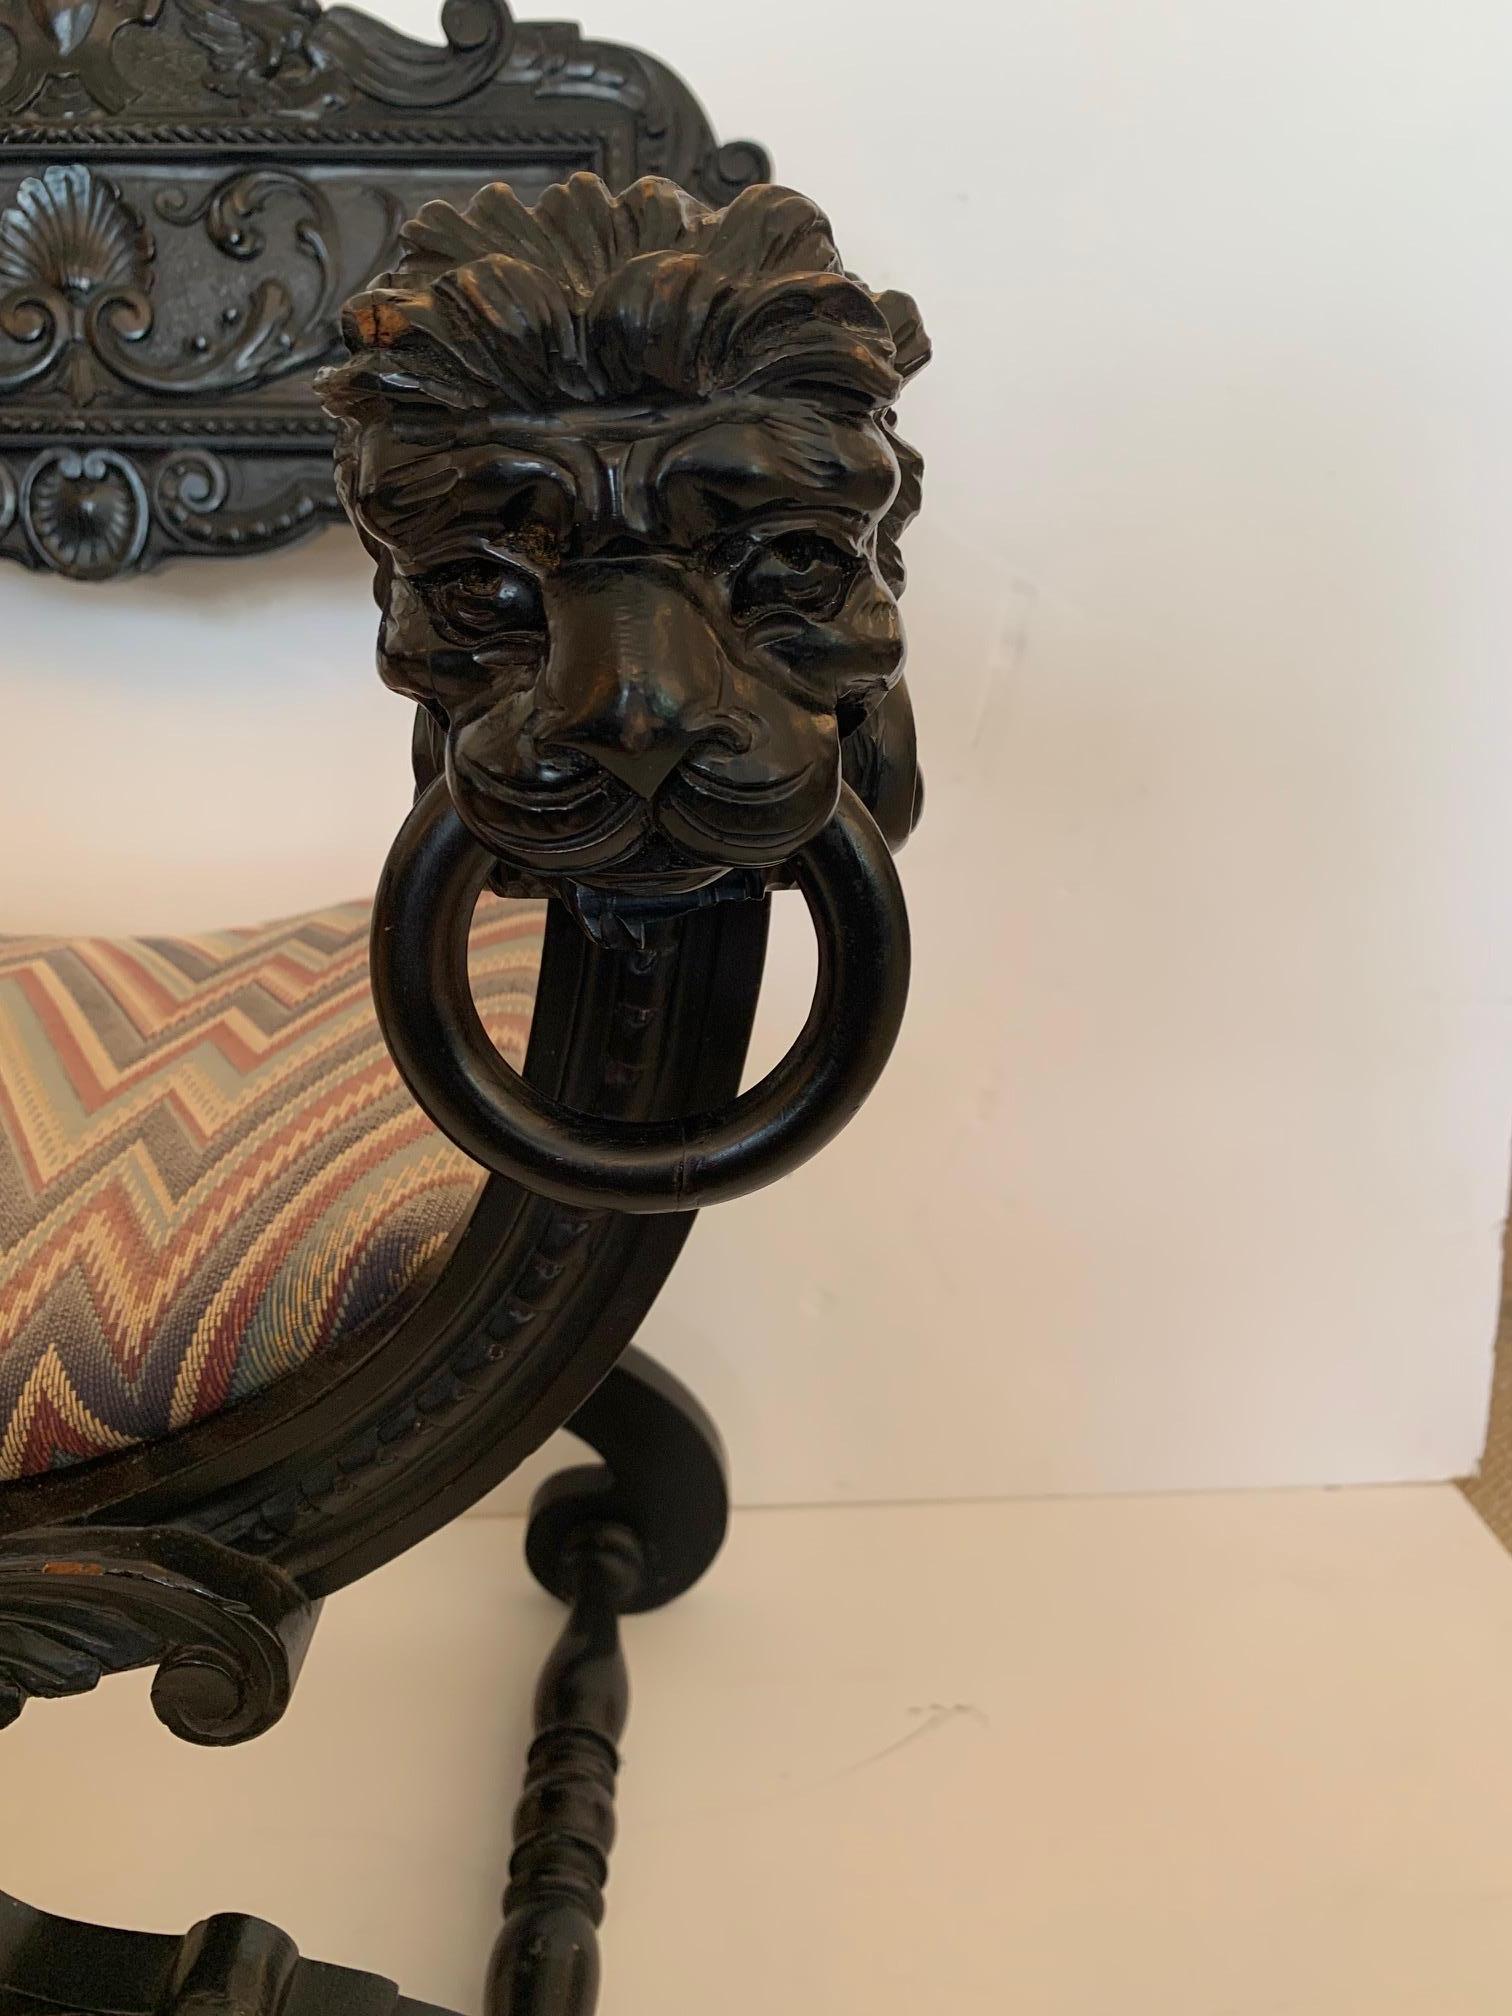 19th Century Stunning Antique Carved Wood Ebonized Throne Style Desk Chair For Sale